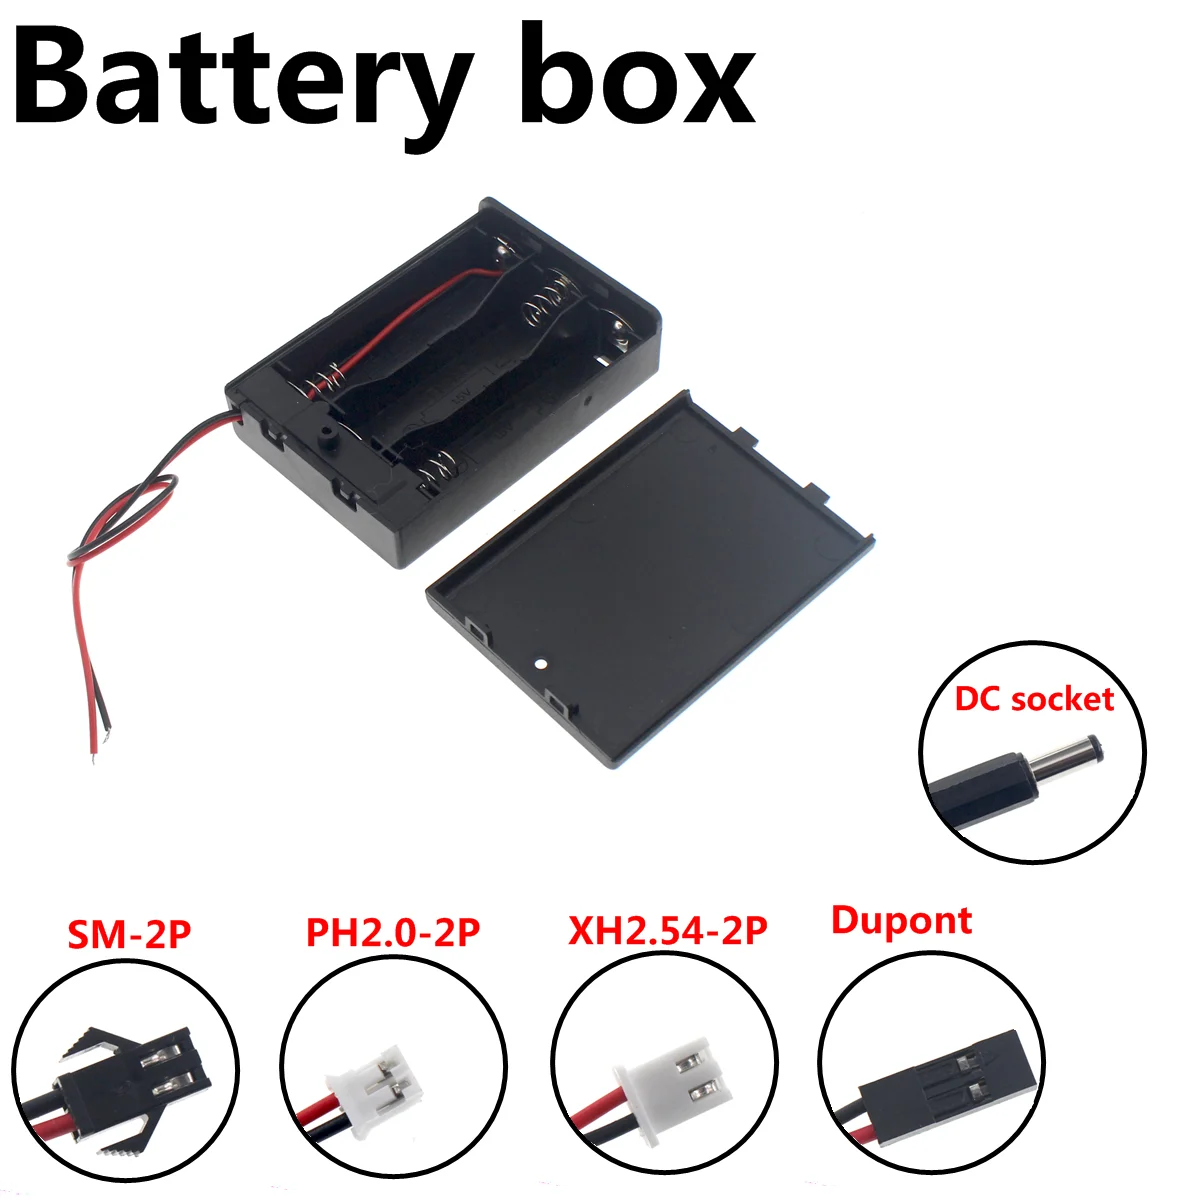 5PCS DIY 3x AA with switch closed Battery Holder Storage Box Case with DC 5.5x2.1mm XH2.54 PH2.0 SM-2P Power Plug